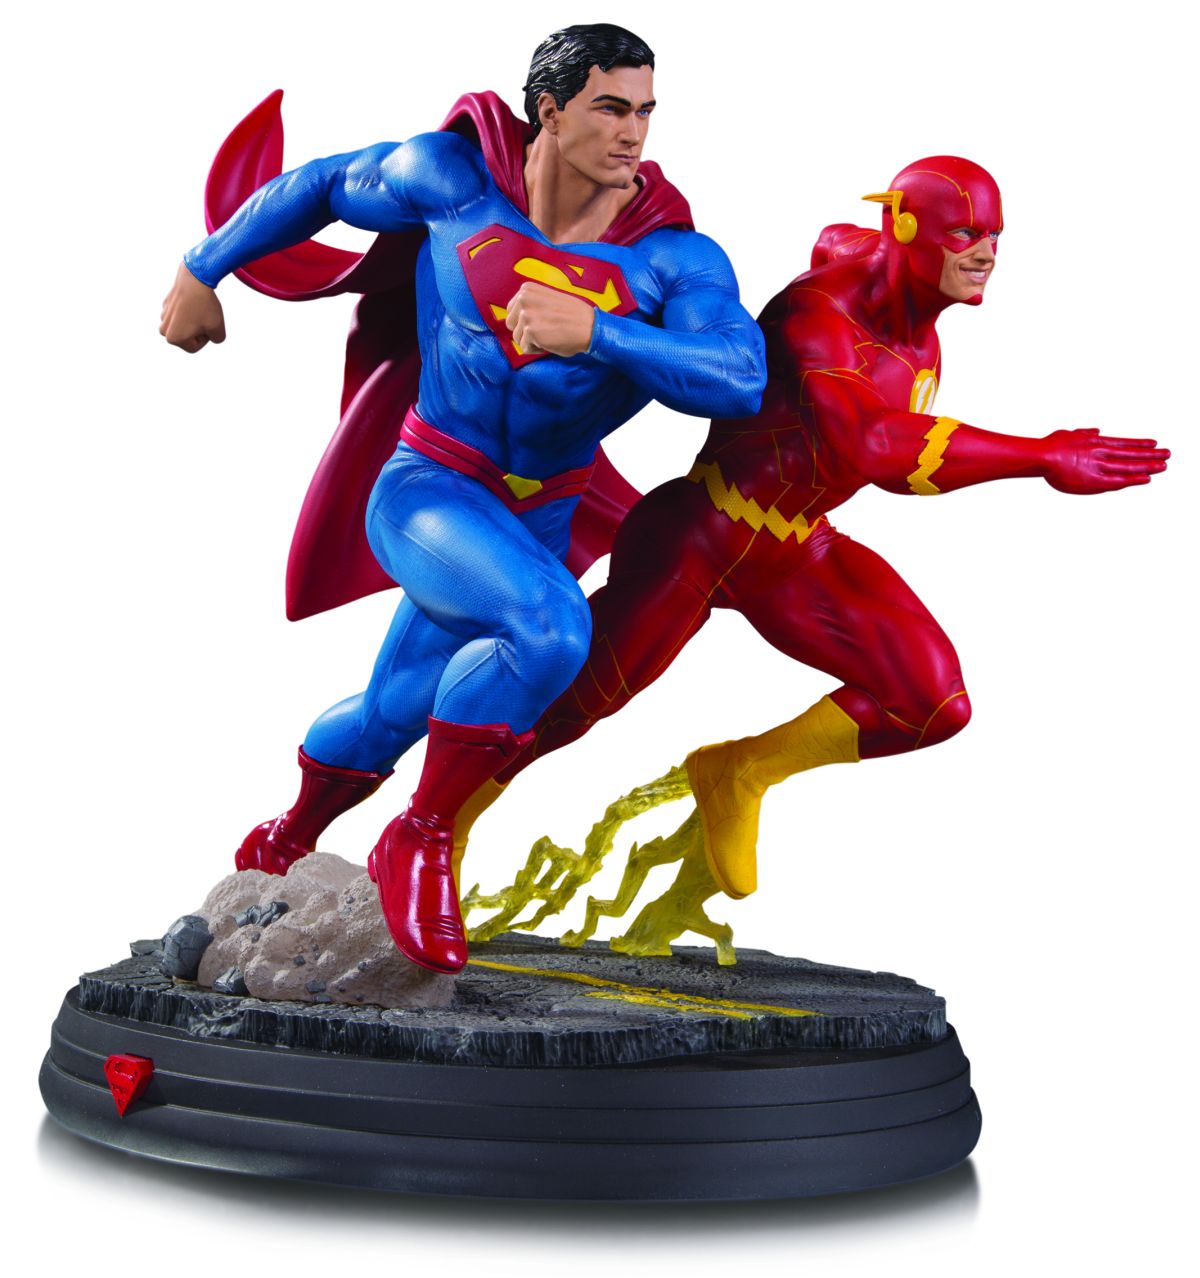 DC GALLERY: SUPERMAN VS. THE FLASH RACING STATUE